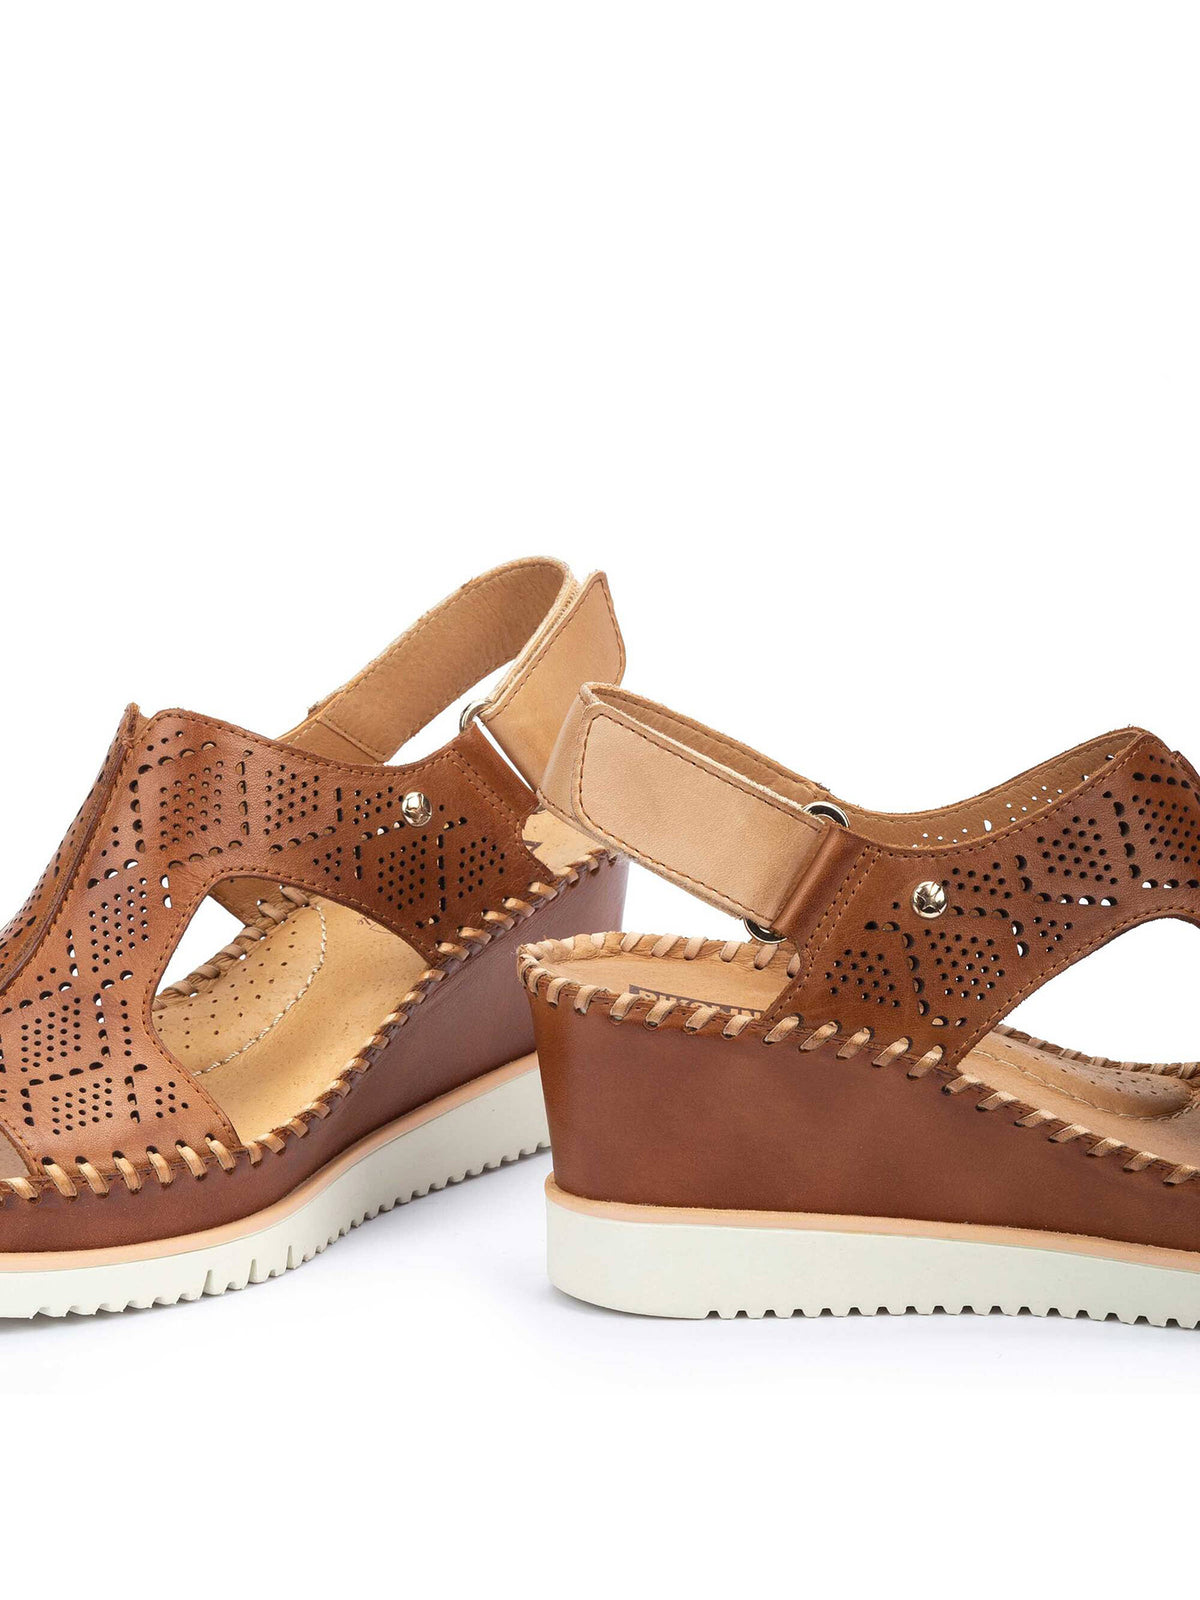 pikolinos aguadulce wedge sandals in brandy-pair view 2